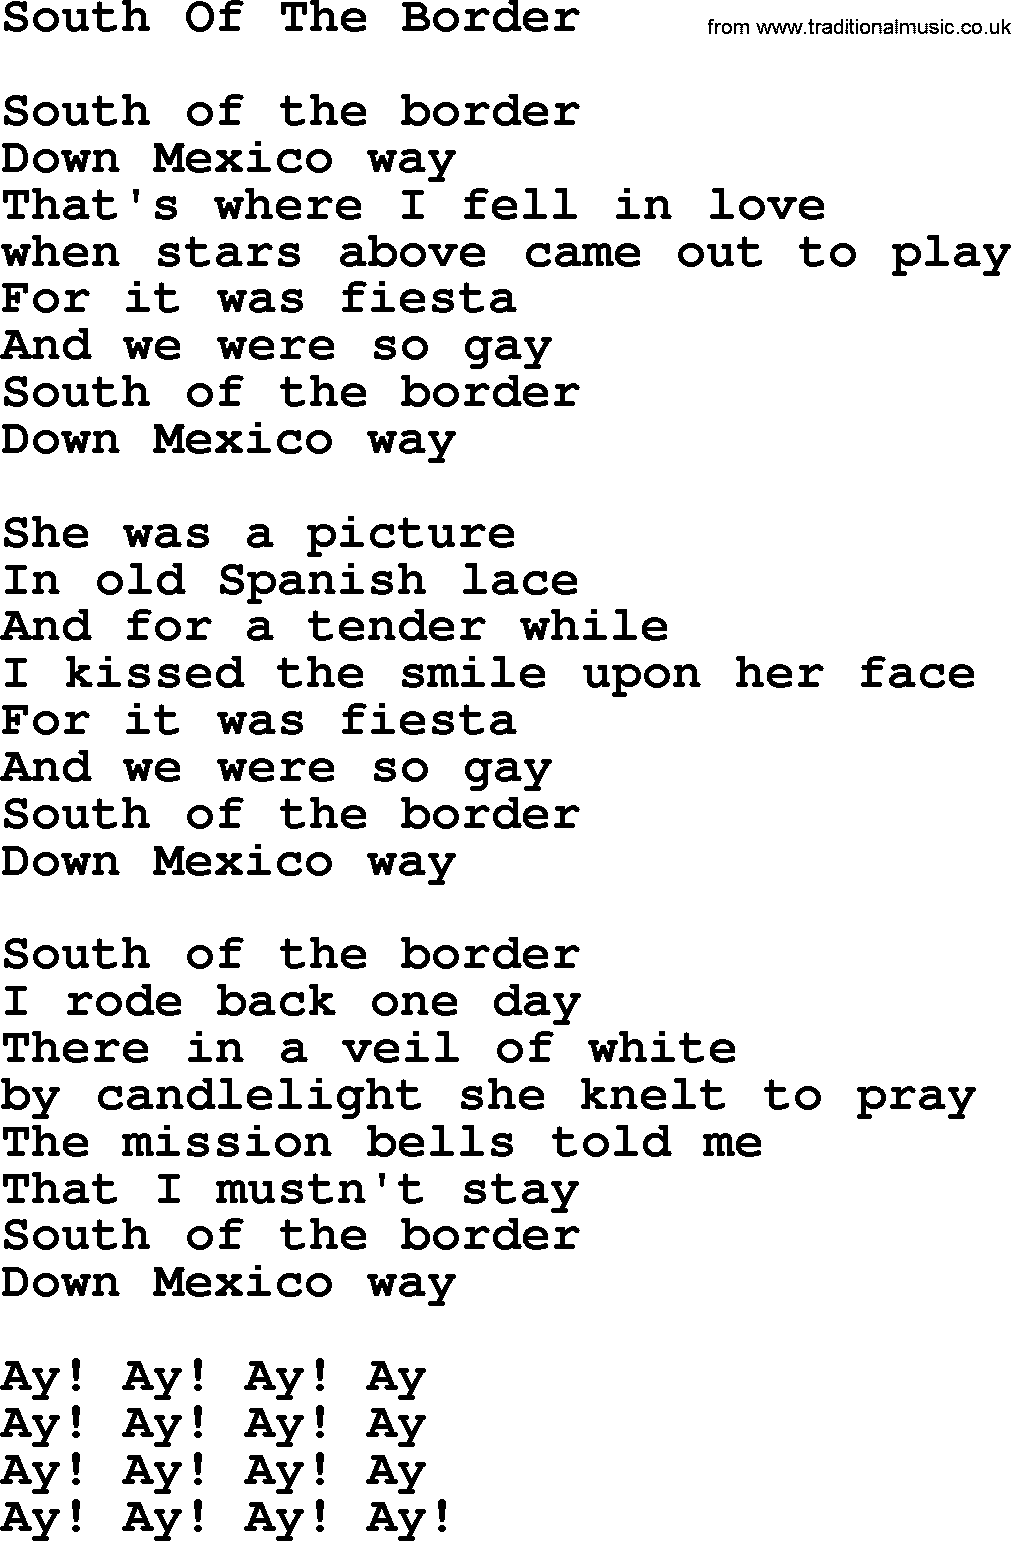 Willie Nelson song: South Of The Border lyrics